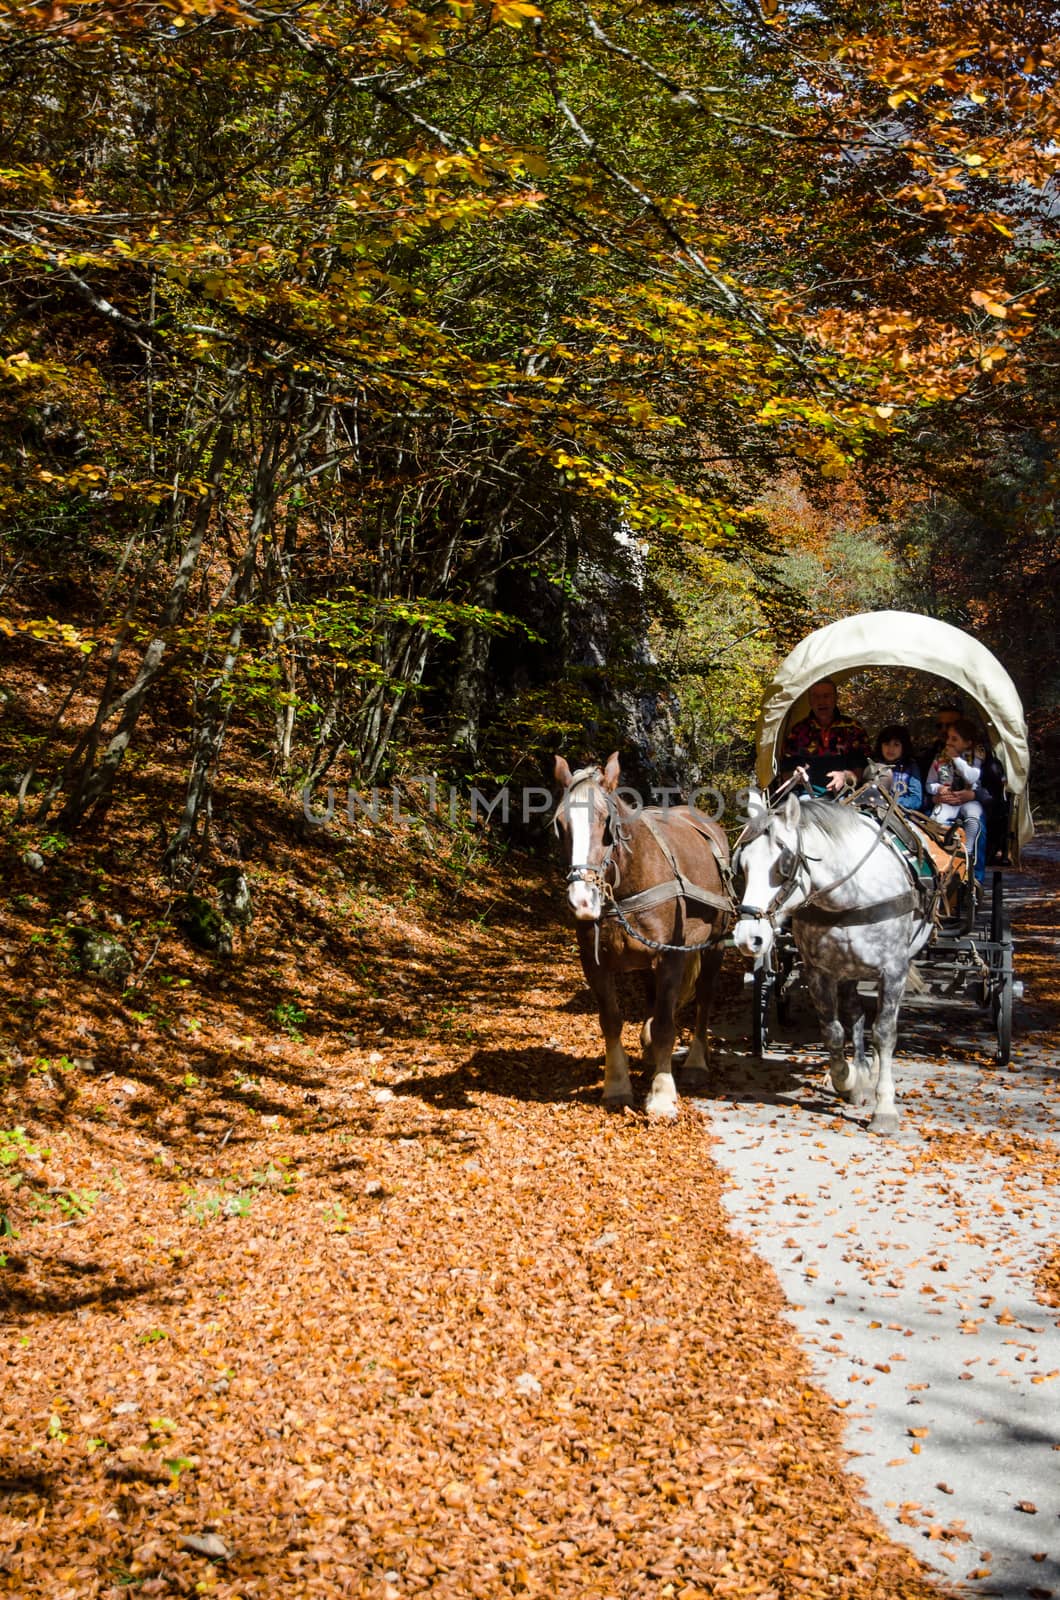 Abruzzo, Italy. October 2018. Autumn colors. Autumn colors and foliage. A family on a "conestoga" type wagon pulled by two horses passes through an avenue covered with fallen leaves and colorful trees by cromam70